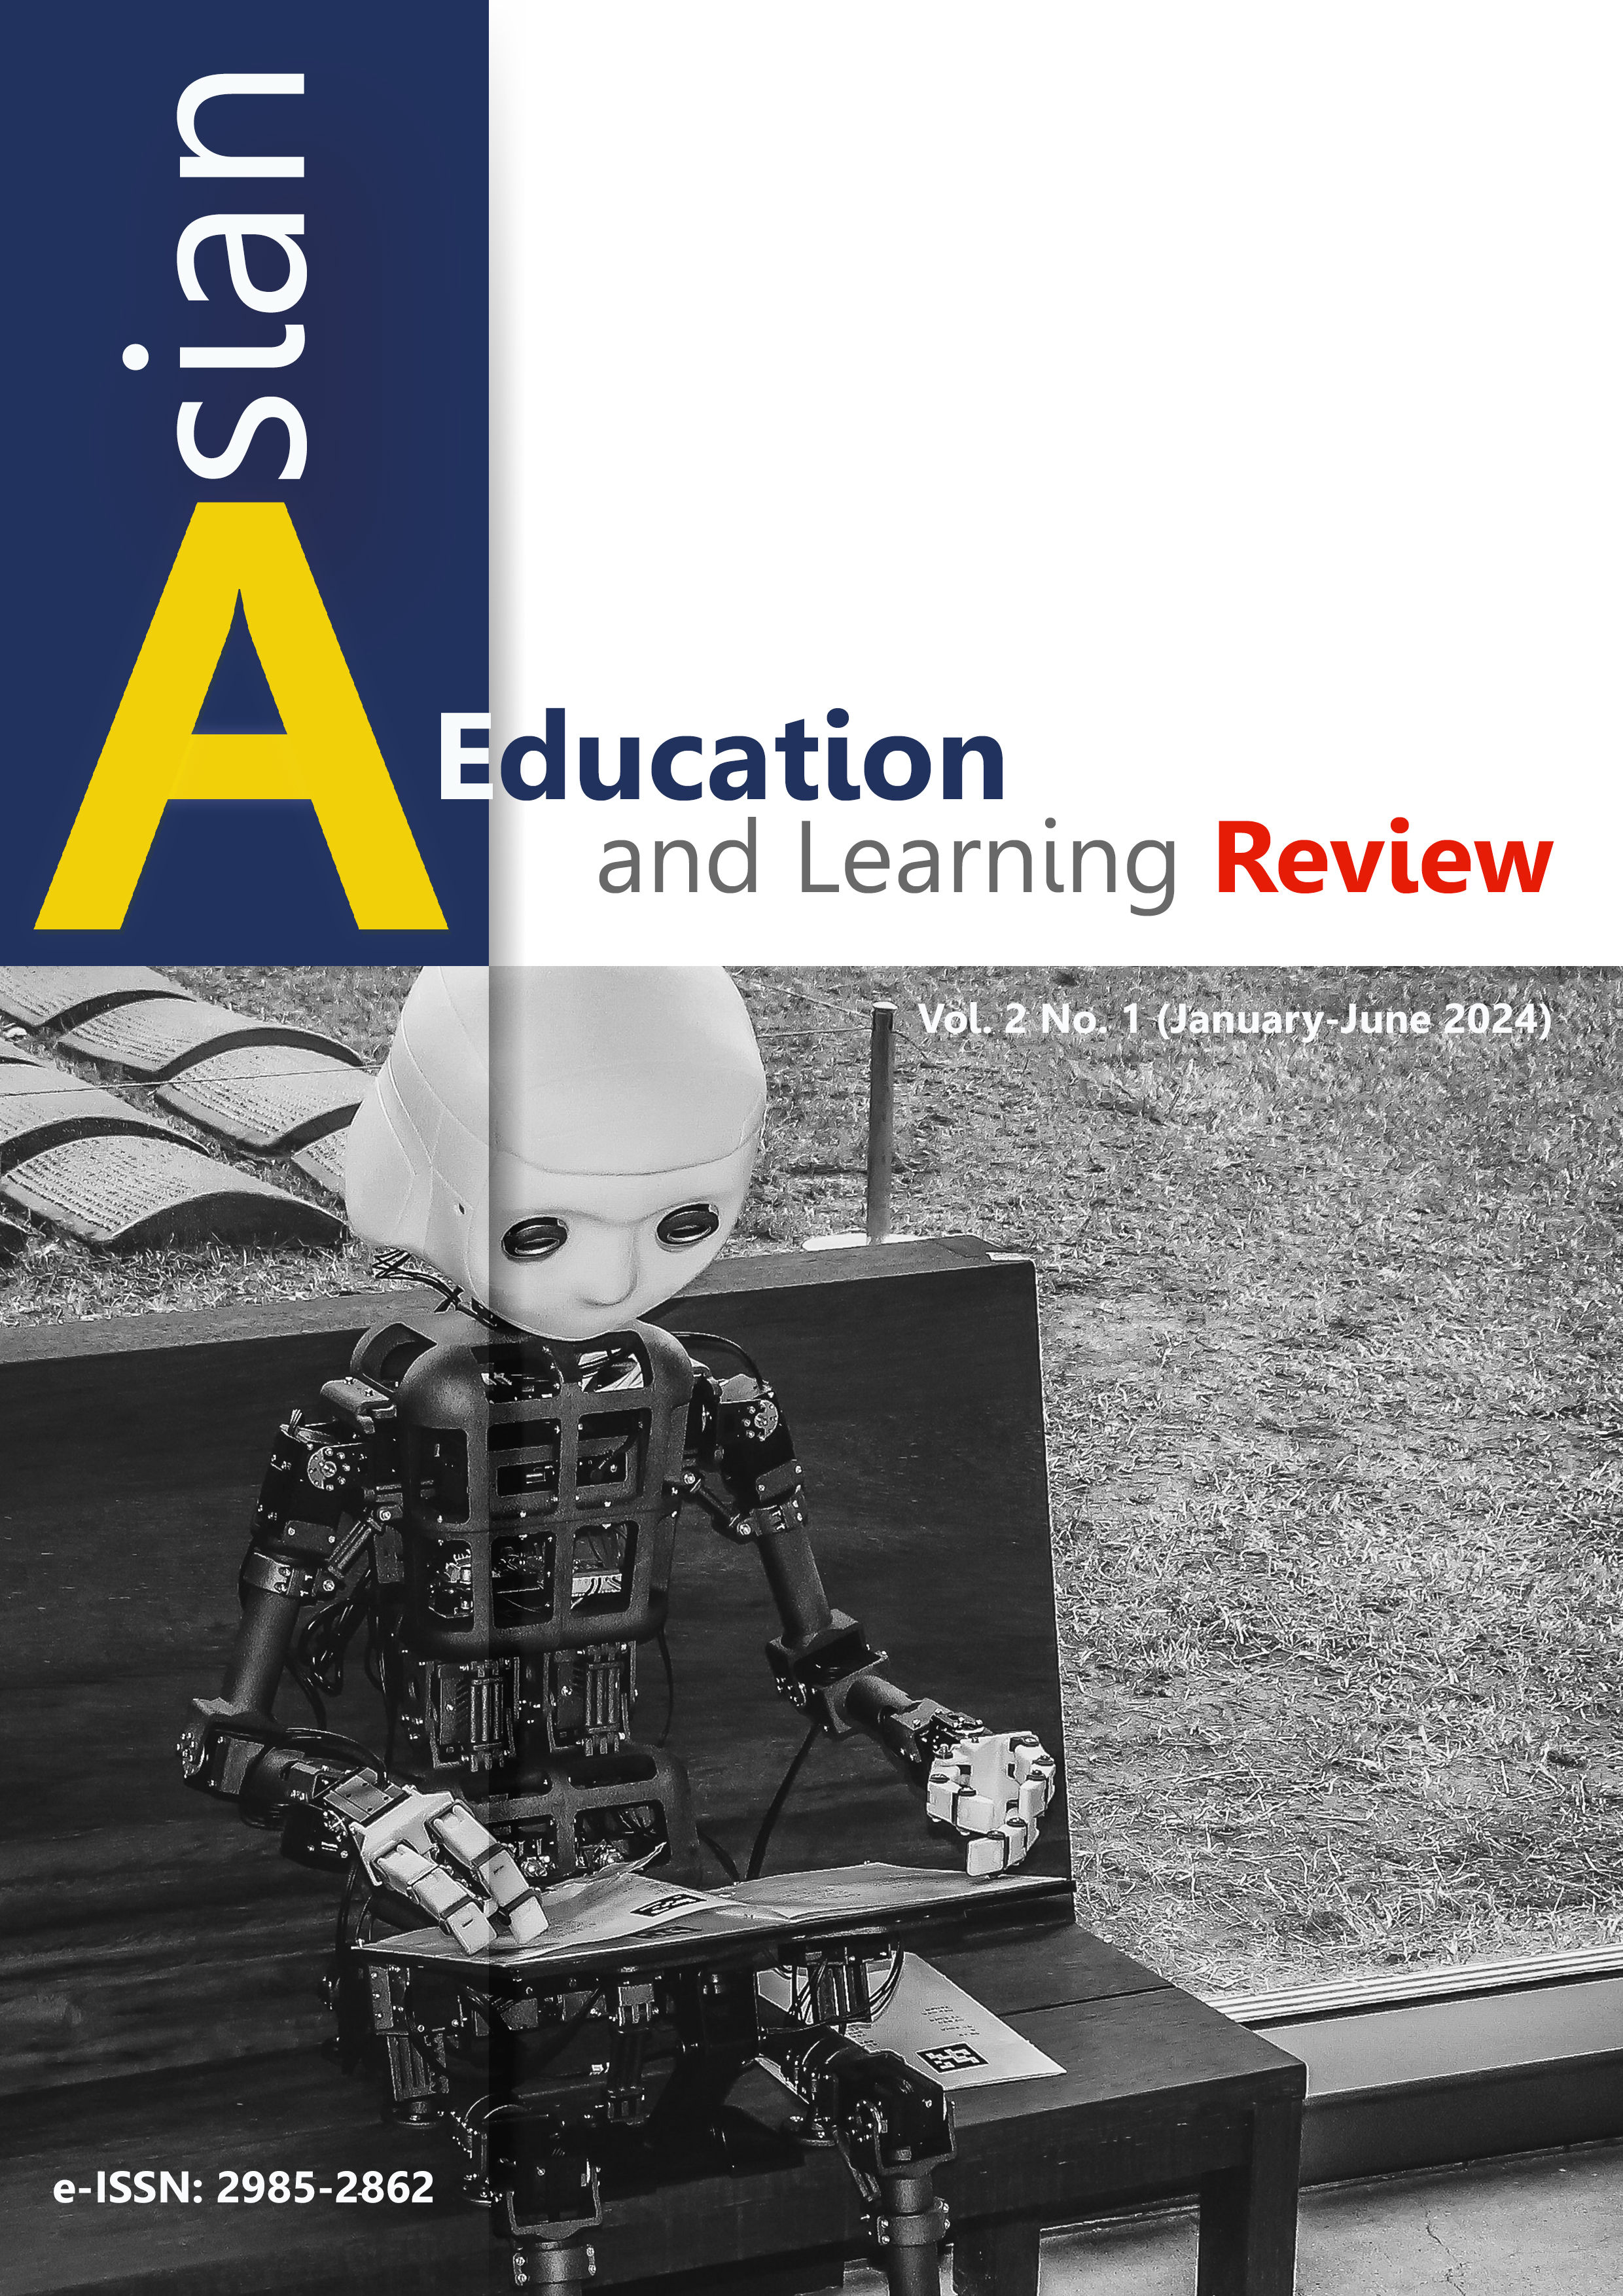 					View Vol. 2 No. 1 (2024): Asian Education and Learning Review
				